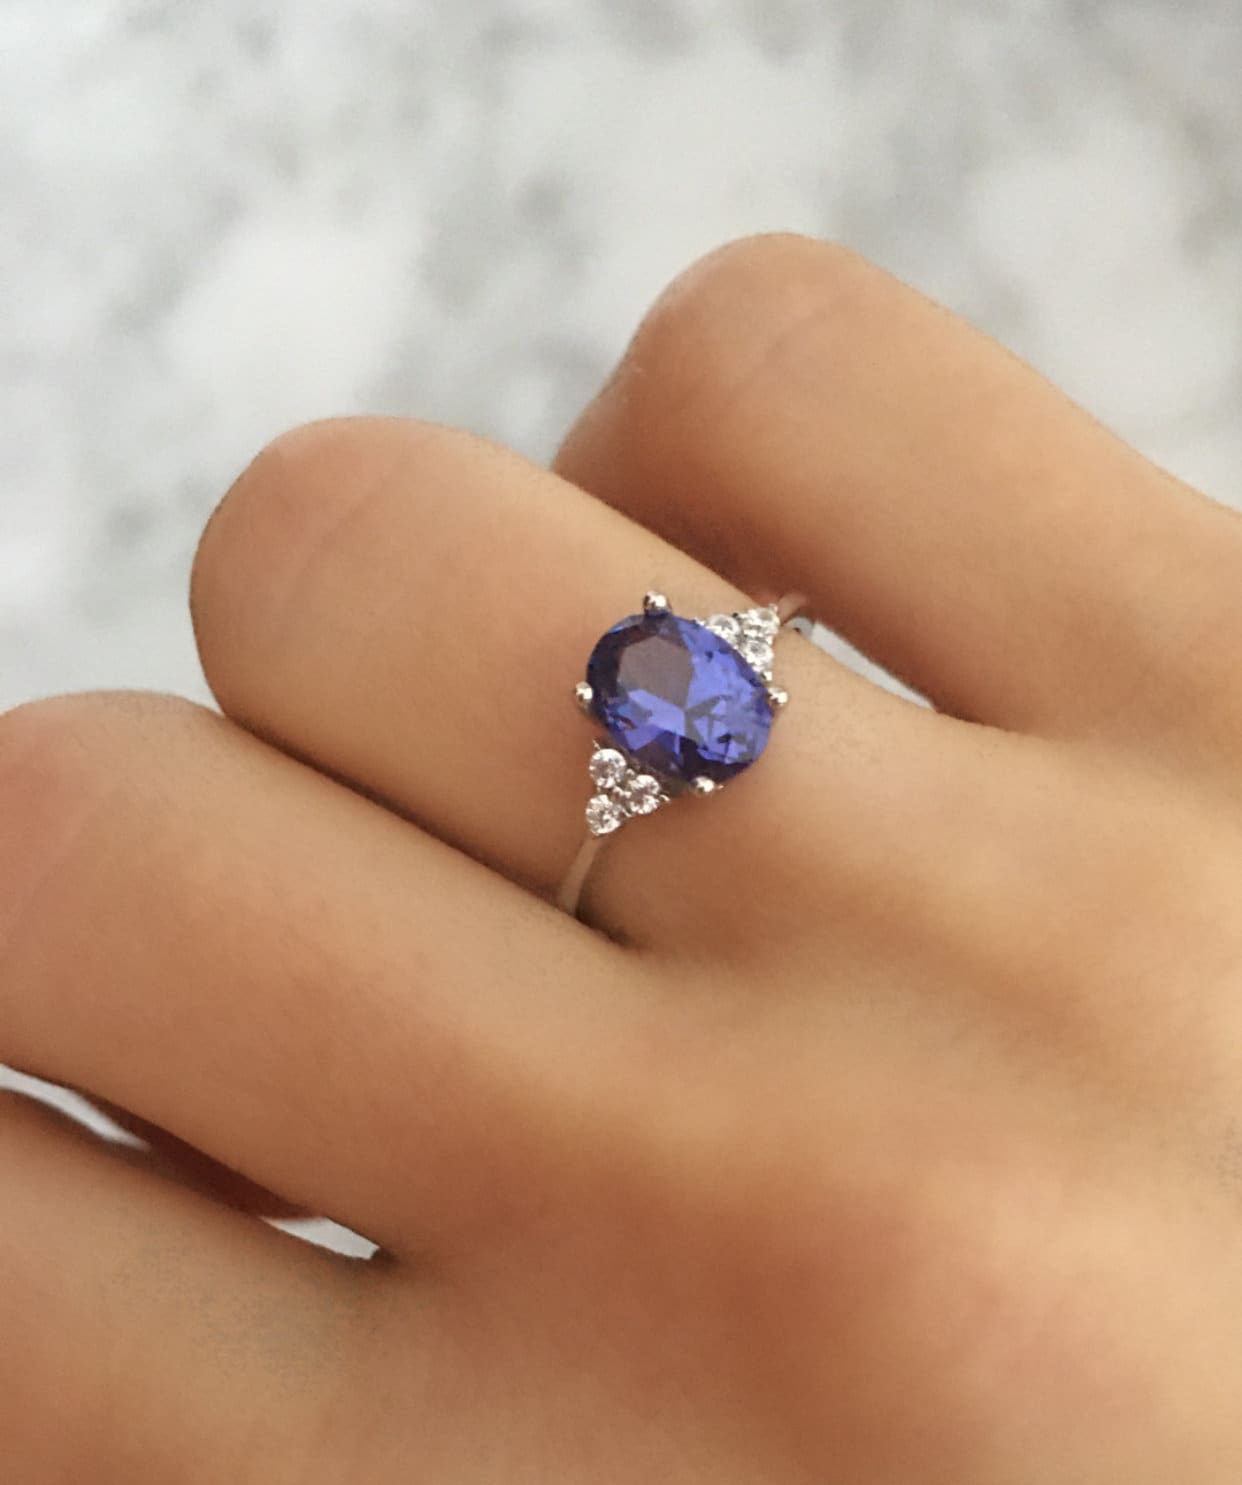 Ladies 925 Solid Sterling Silver Brilliant Cut Tanzanite Solitaire Ring